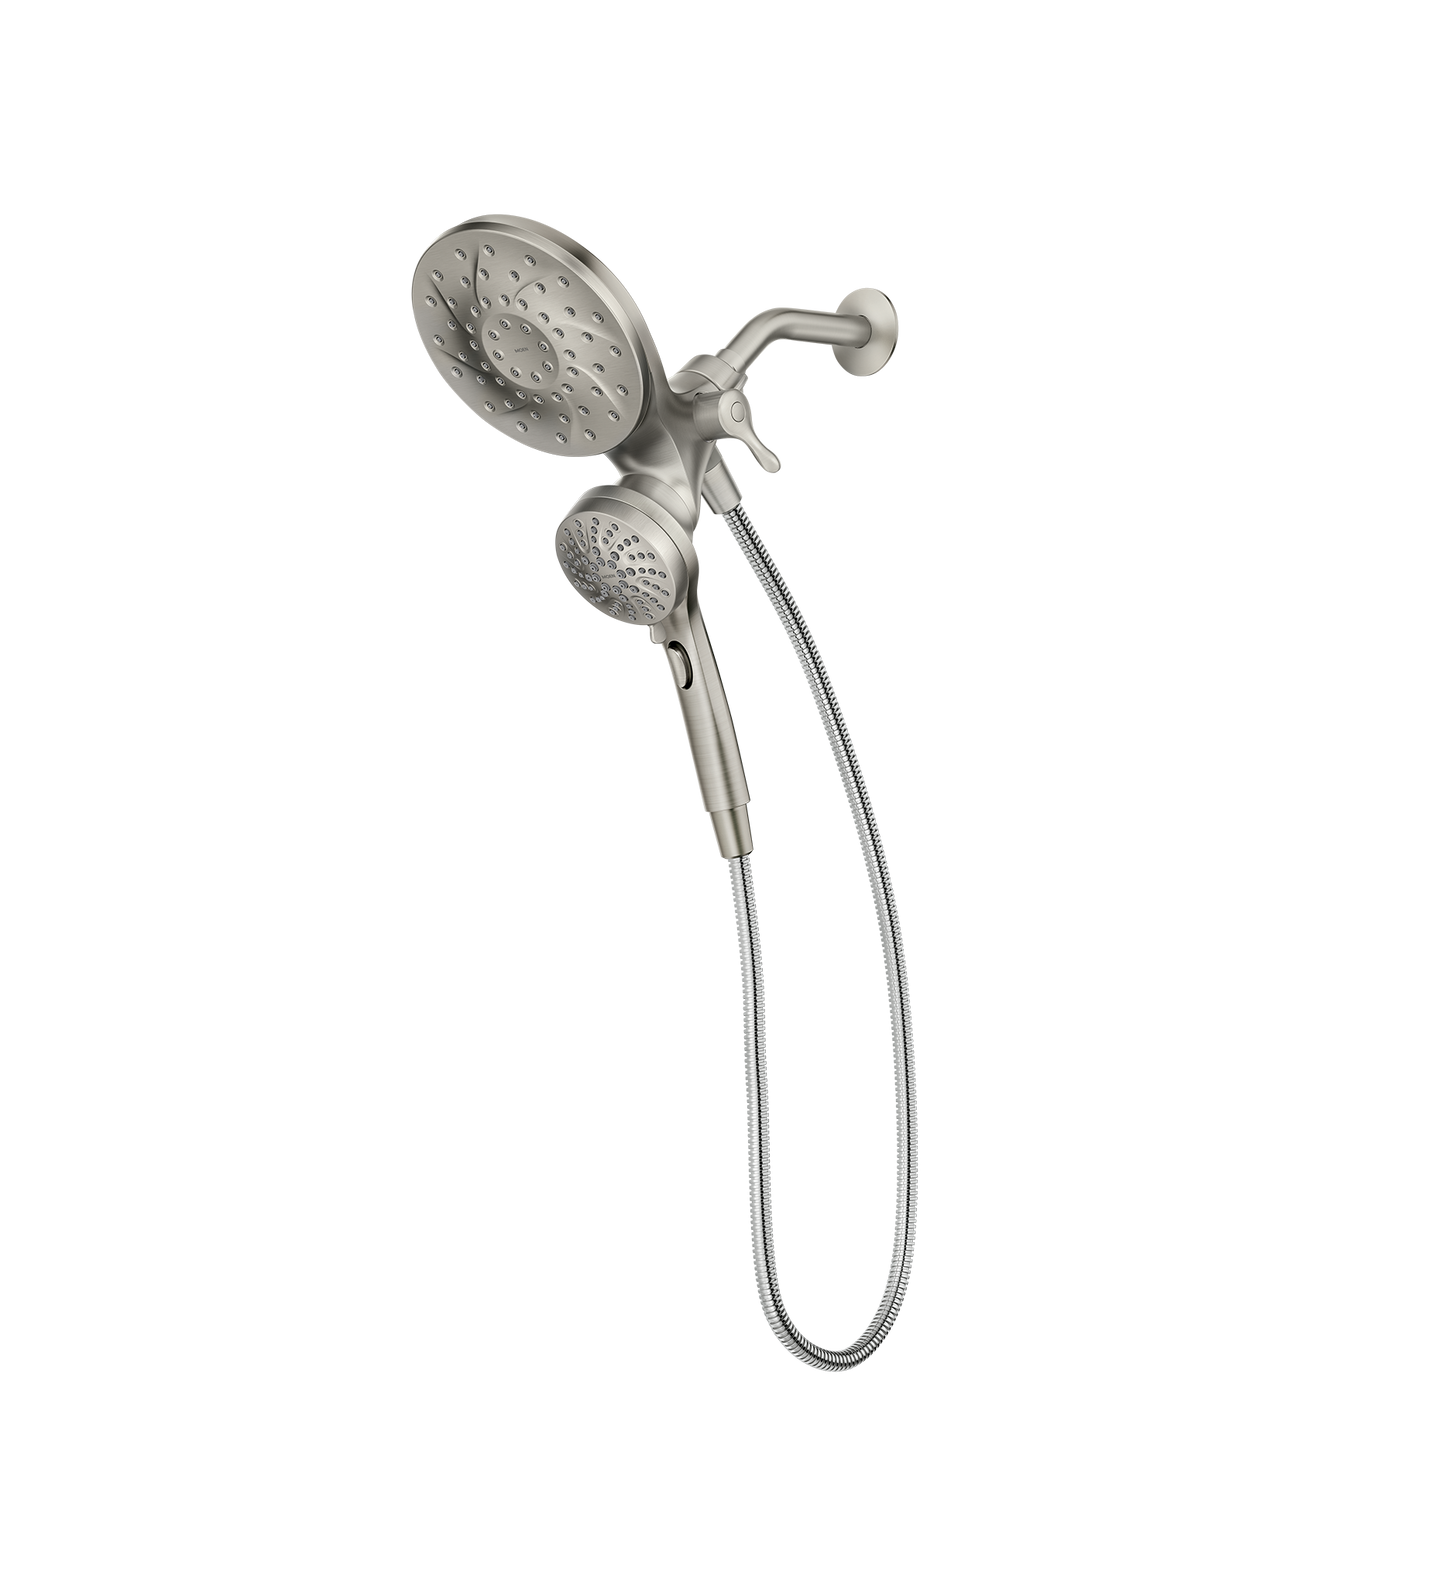 Engage Six-Function Standard With Handheld Shower